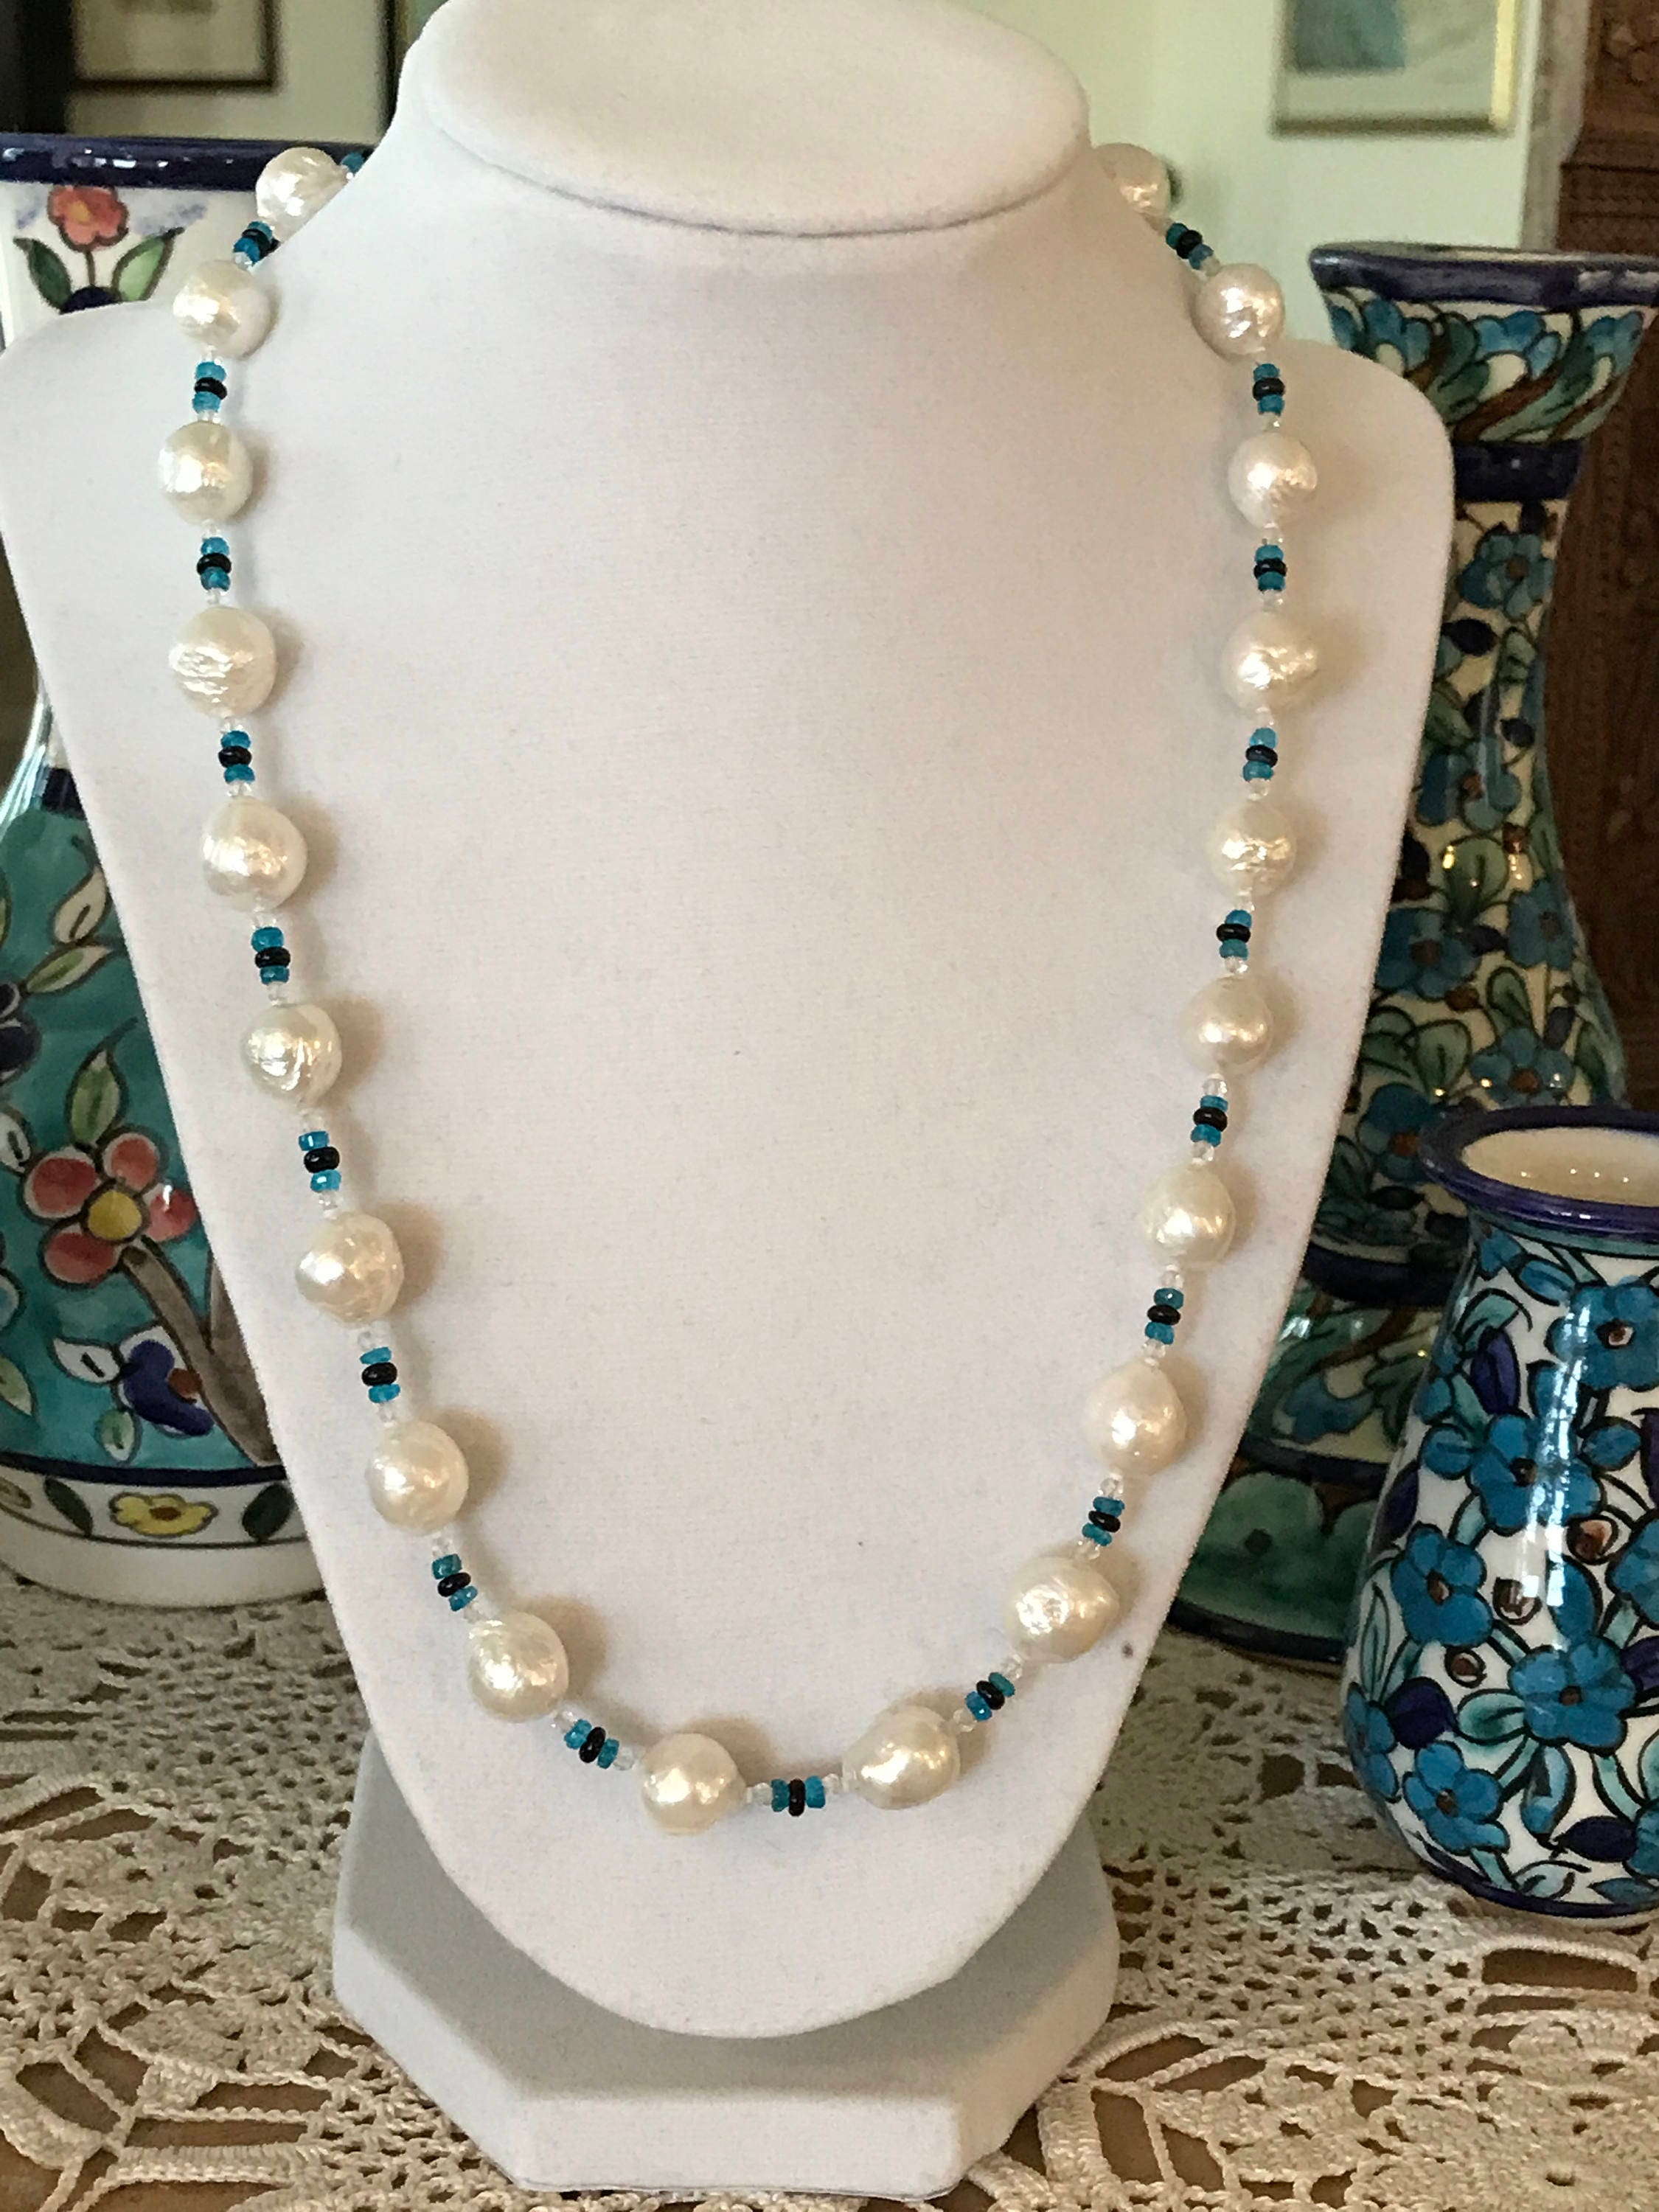 Cultured Freshwater Pearls, Apatite, White Topaz, and Black Opal ...